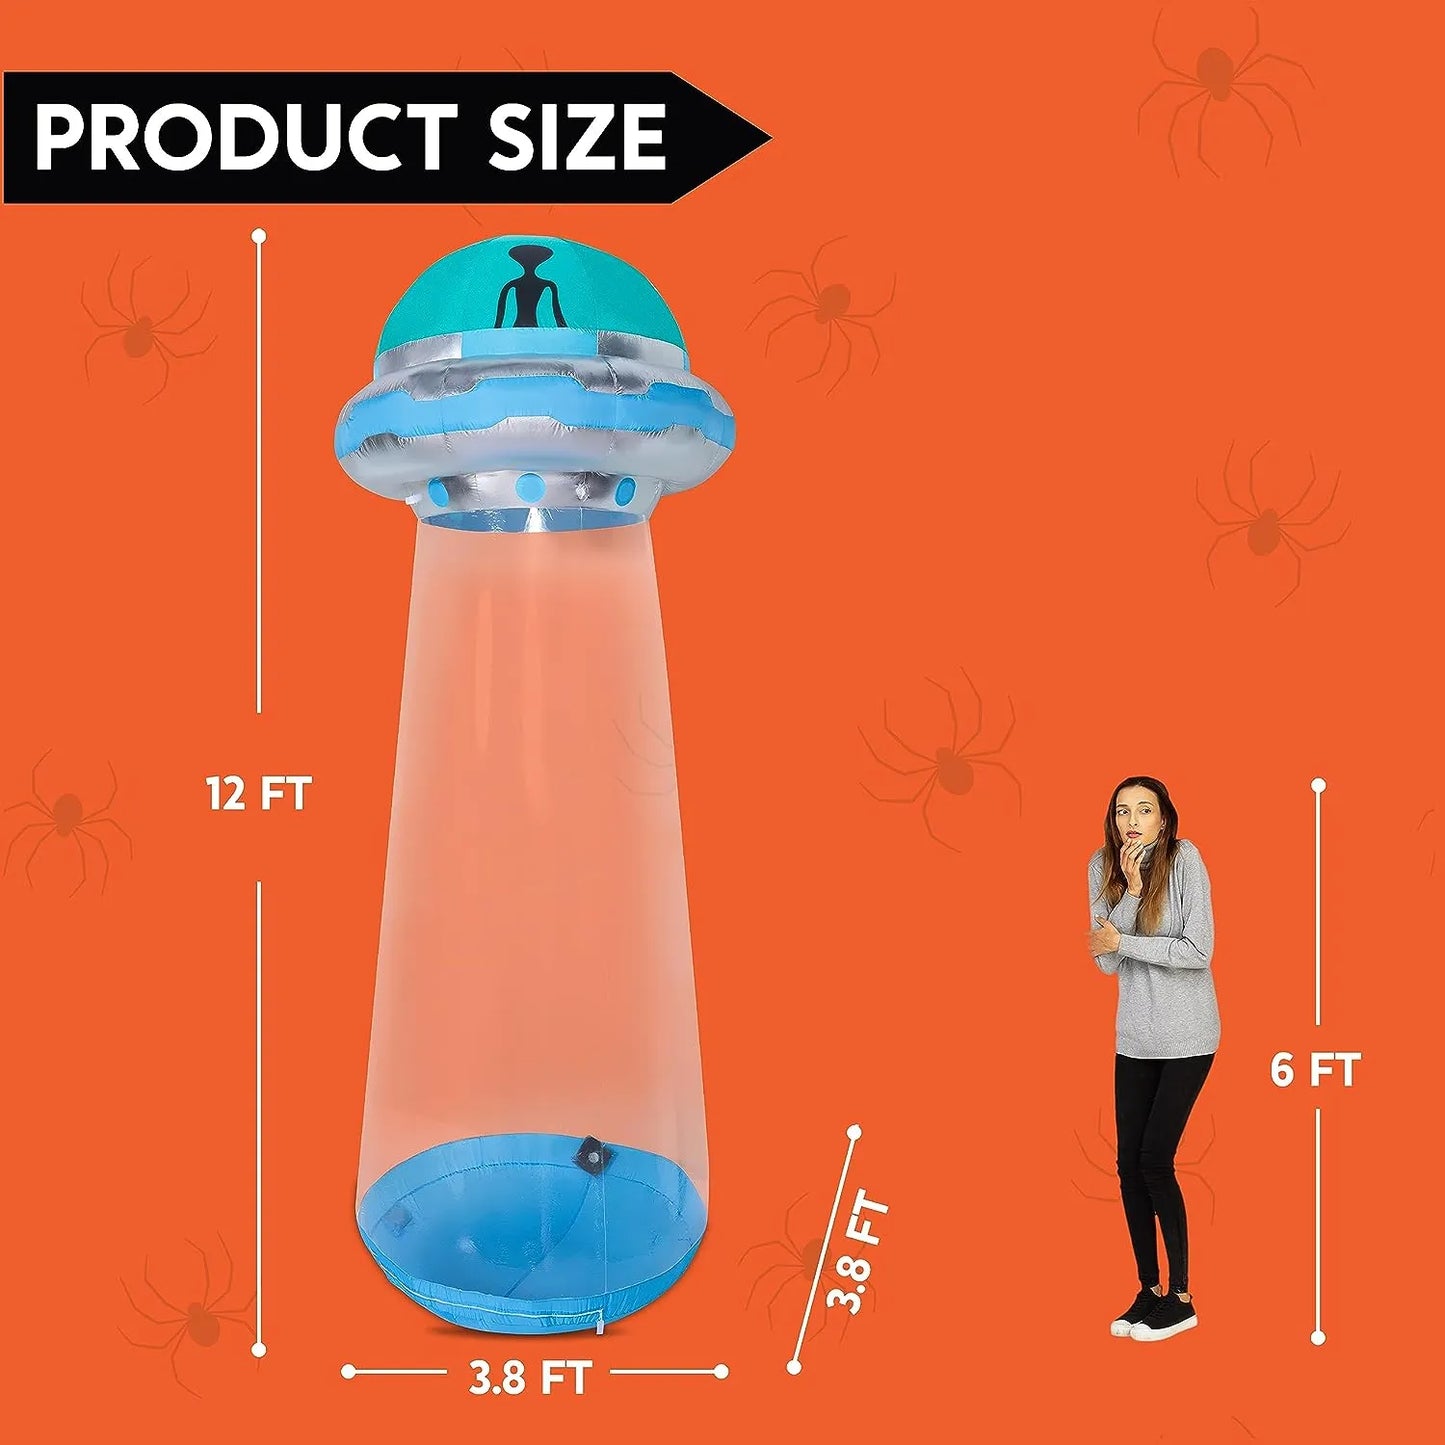 12 FT Tall Halloween Inflatable UFO Decoration with Built-in LEDs